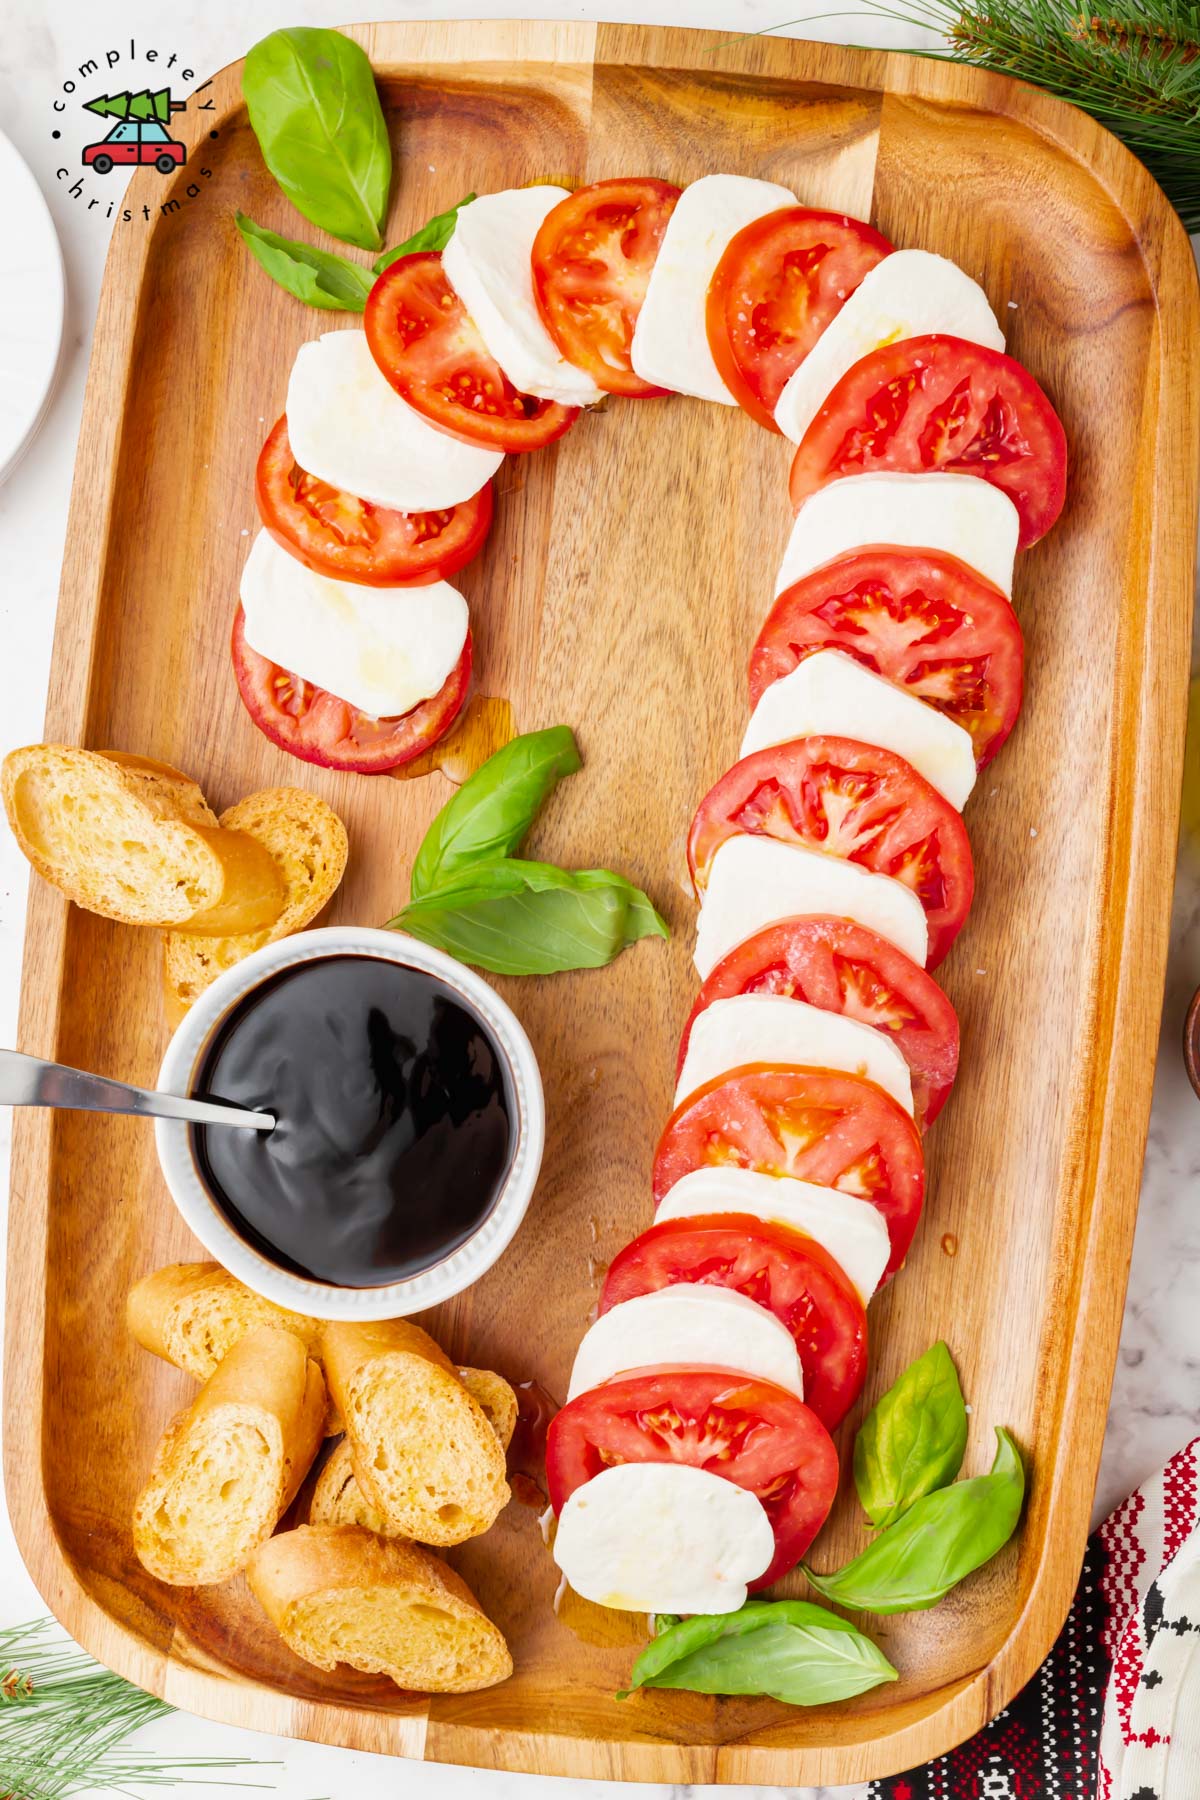 Caprese salad ingredients shaped into a candy cane with basil sprinkled on the platter and a bowl of balsamic vinaigrette and toasted baguette slices.